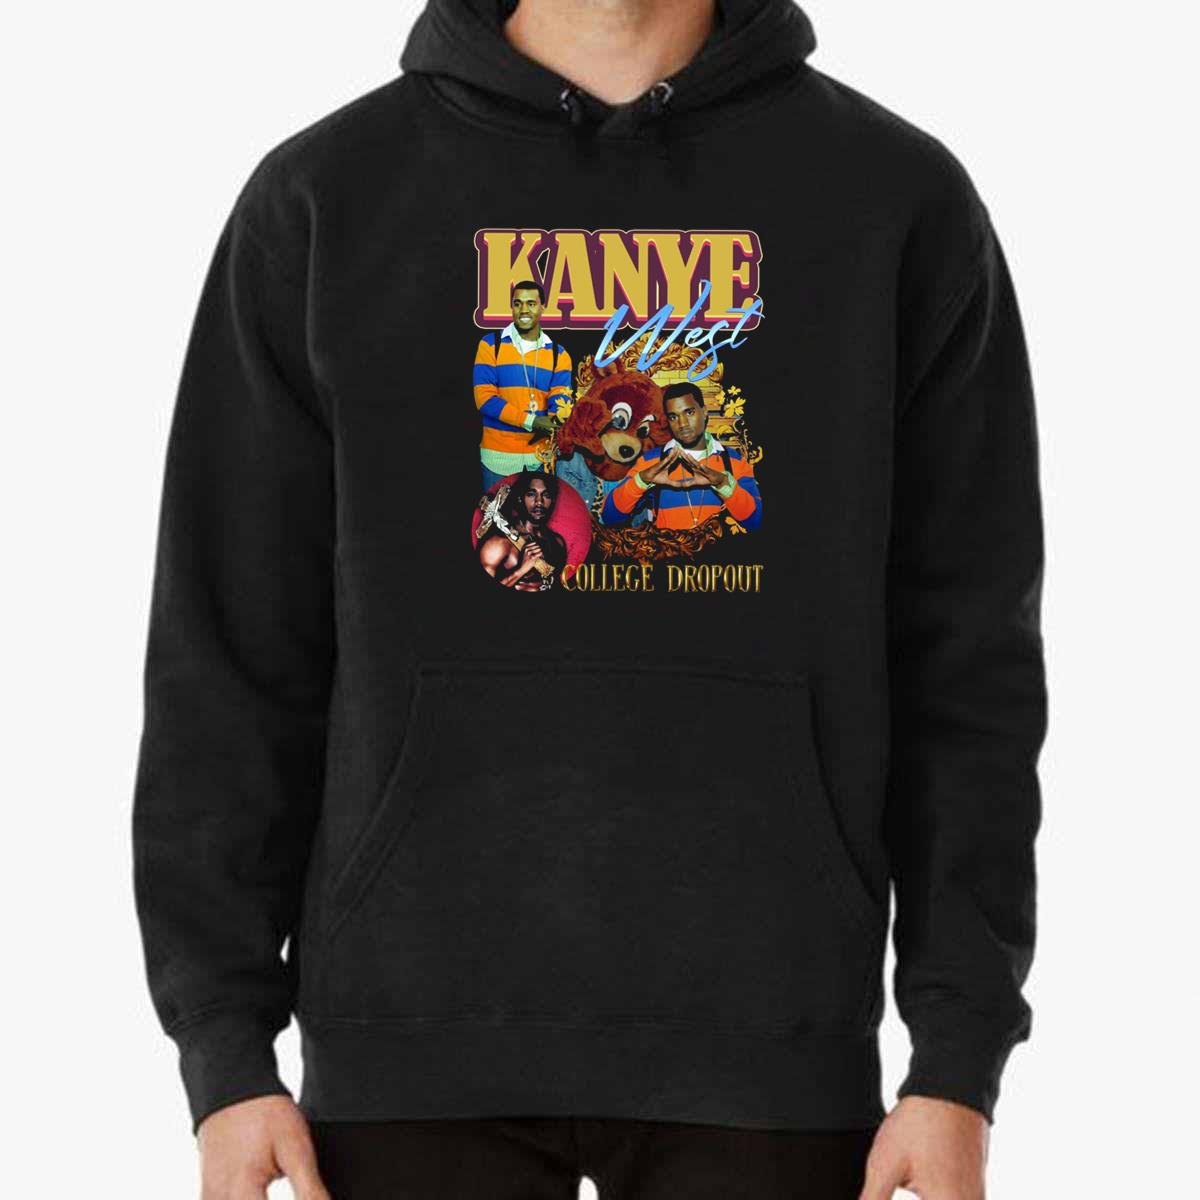 10 Years Later: Kanye West's The College Dropout - Deadshirt